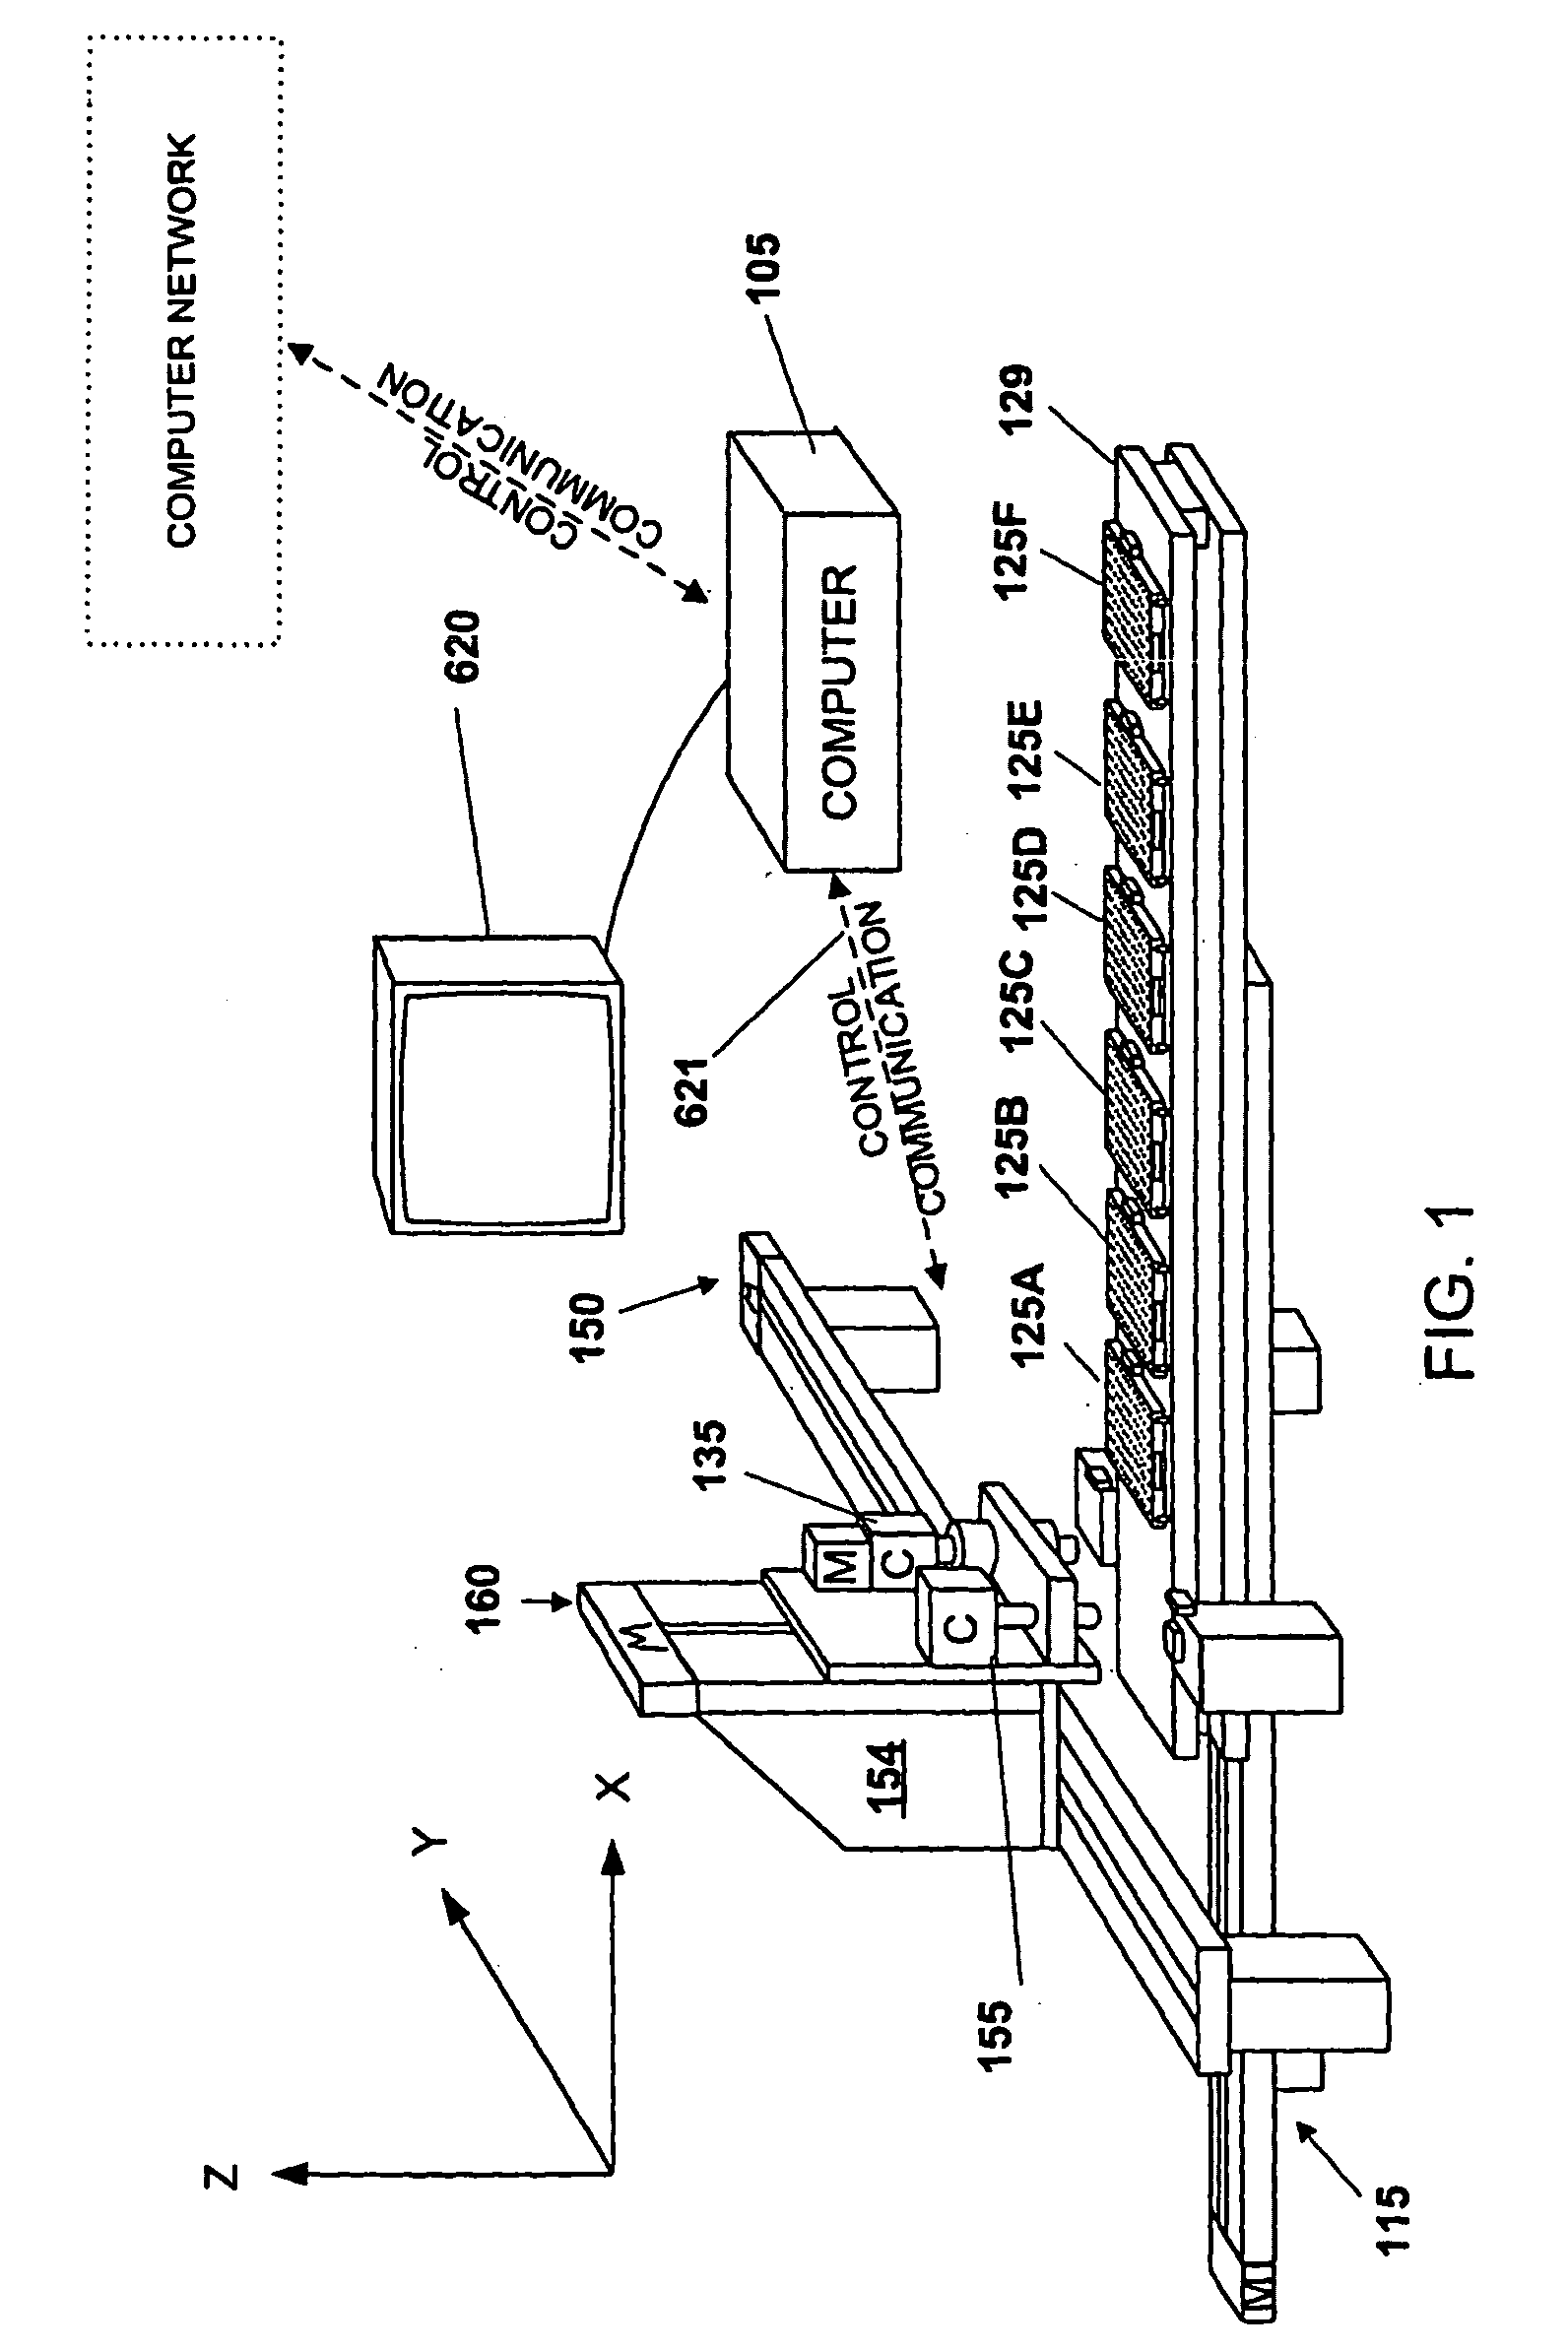 Computer Controllable LED Light Source for Device for Inspecting Microscopic Objects